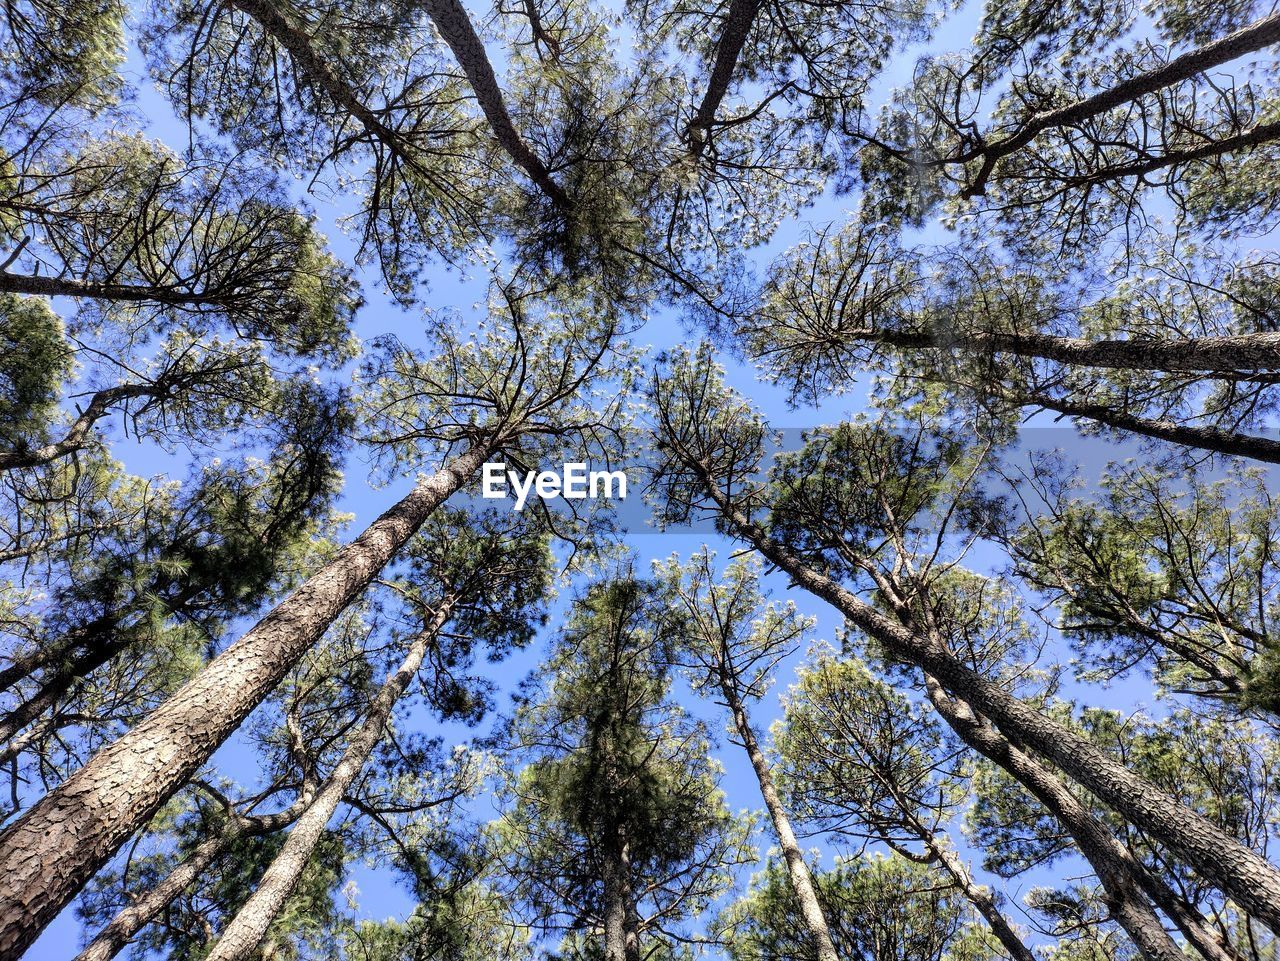 Capturing the beauty of tall trees from the ground